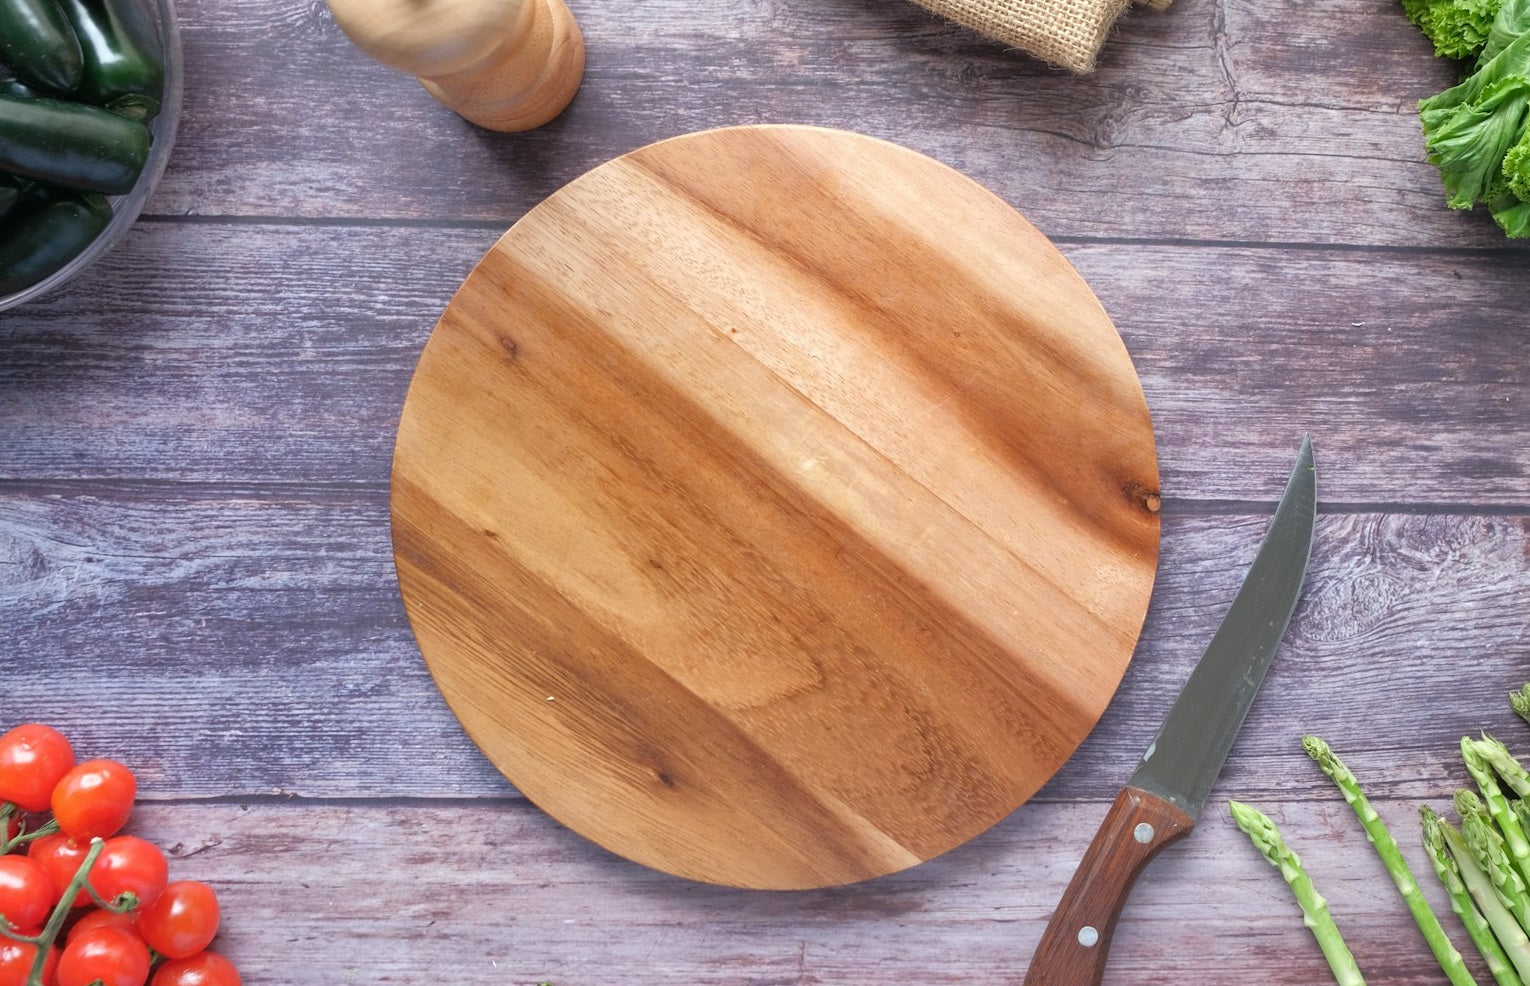 Why You Should Use a Wooden Chopping Board